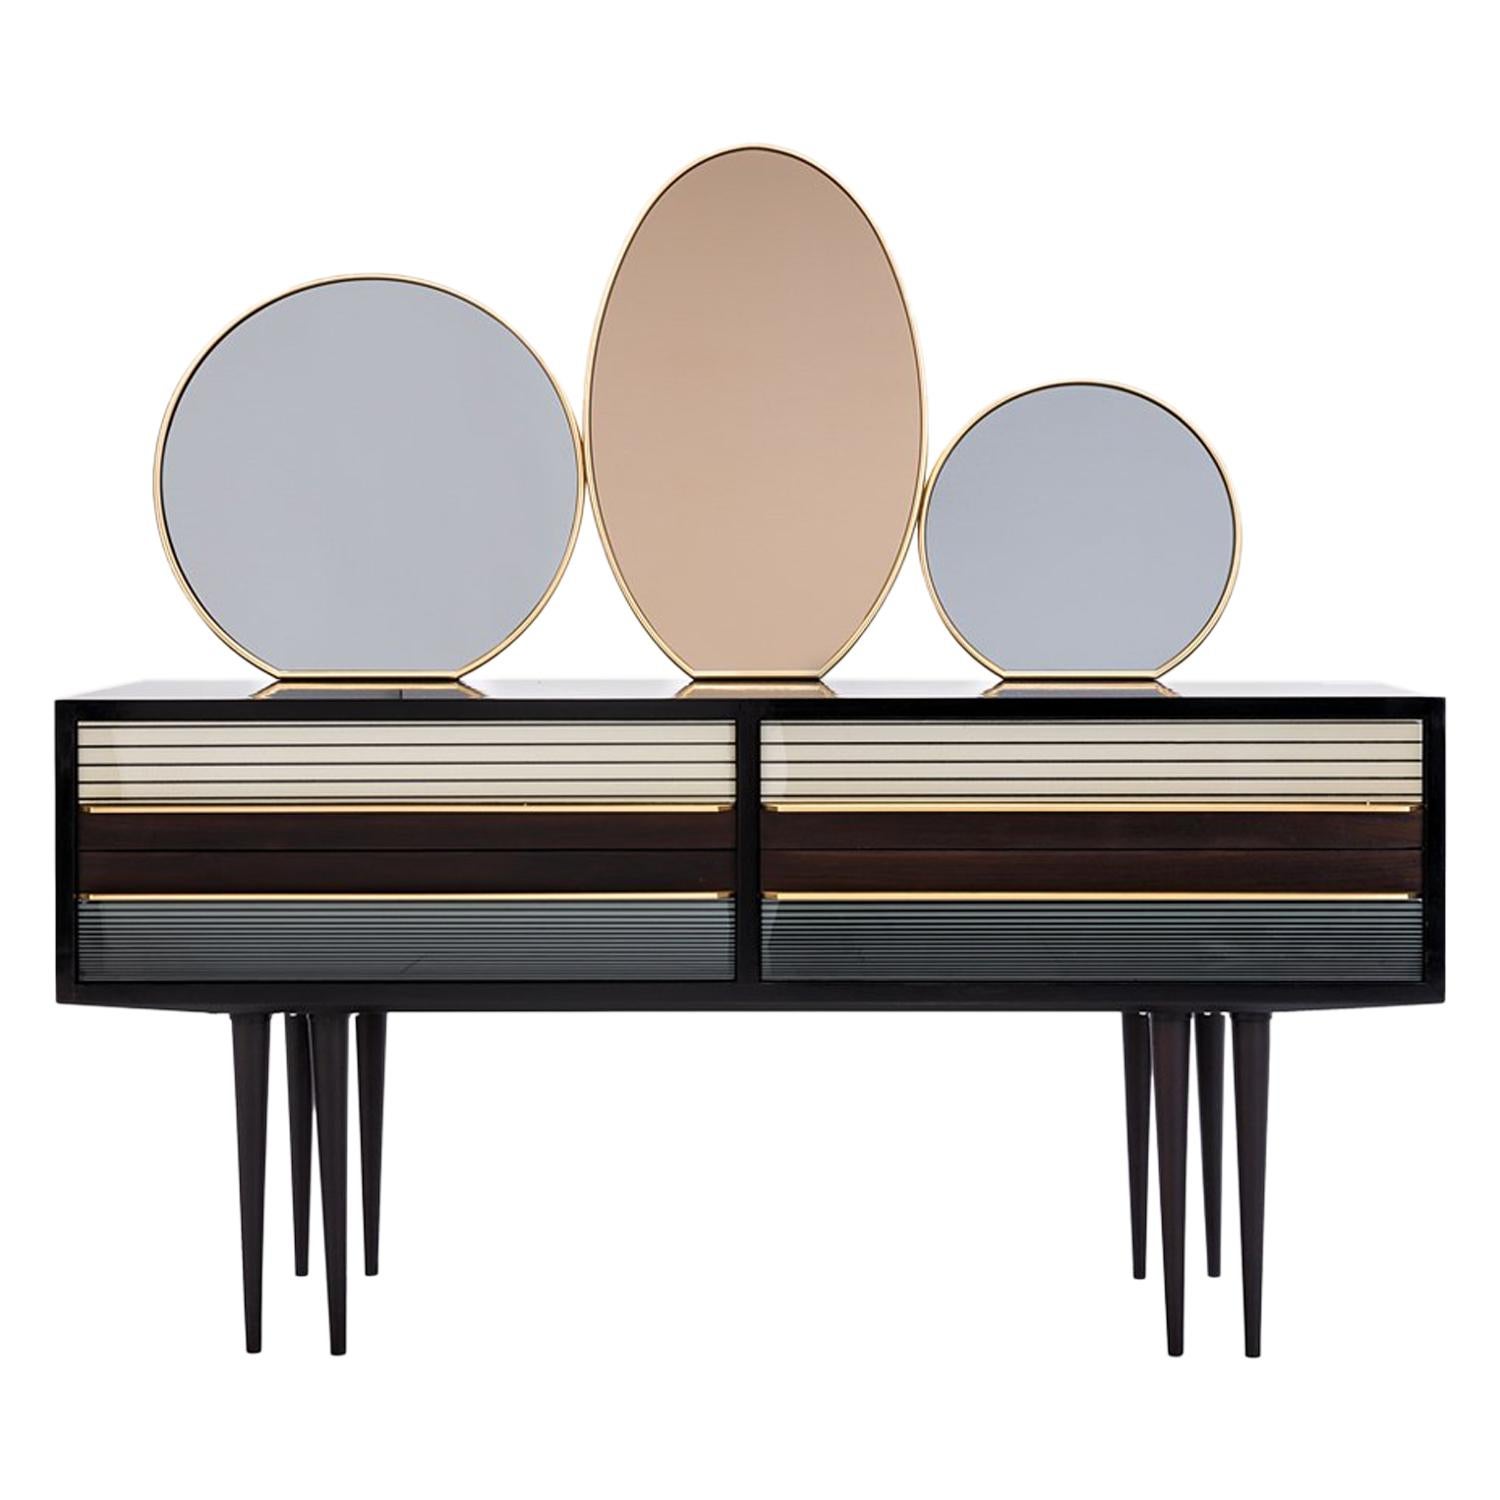 Baxter Buffet No. 2 in Rosewood with Tinted Mirrors, circa 1950 by Draga & Aurel For Sale